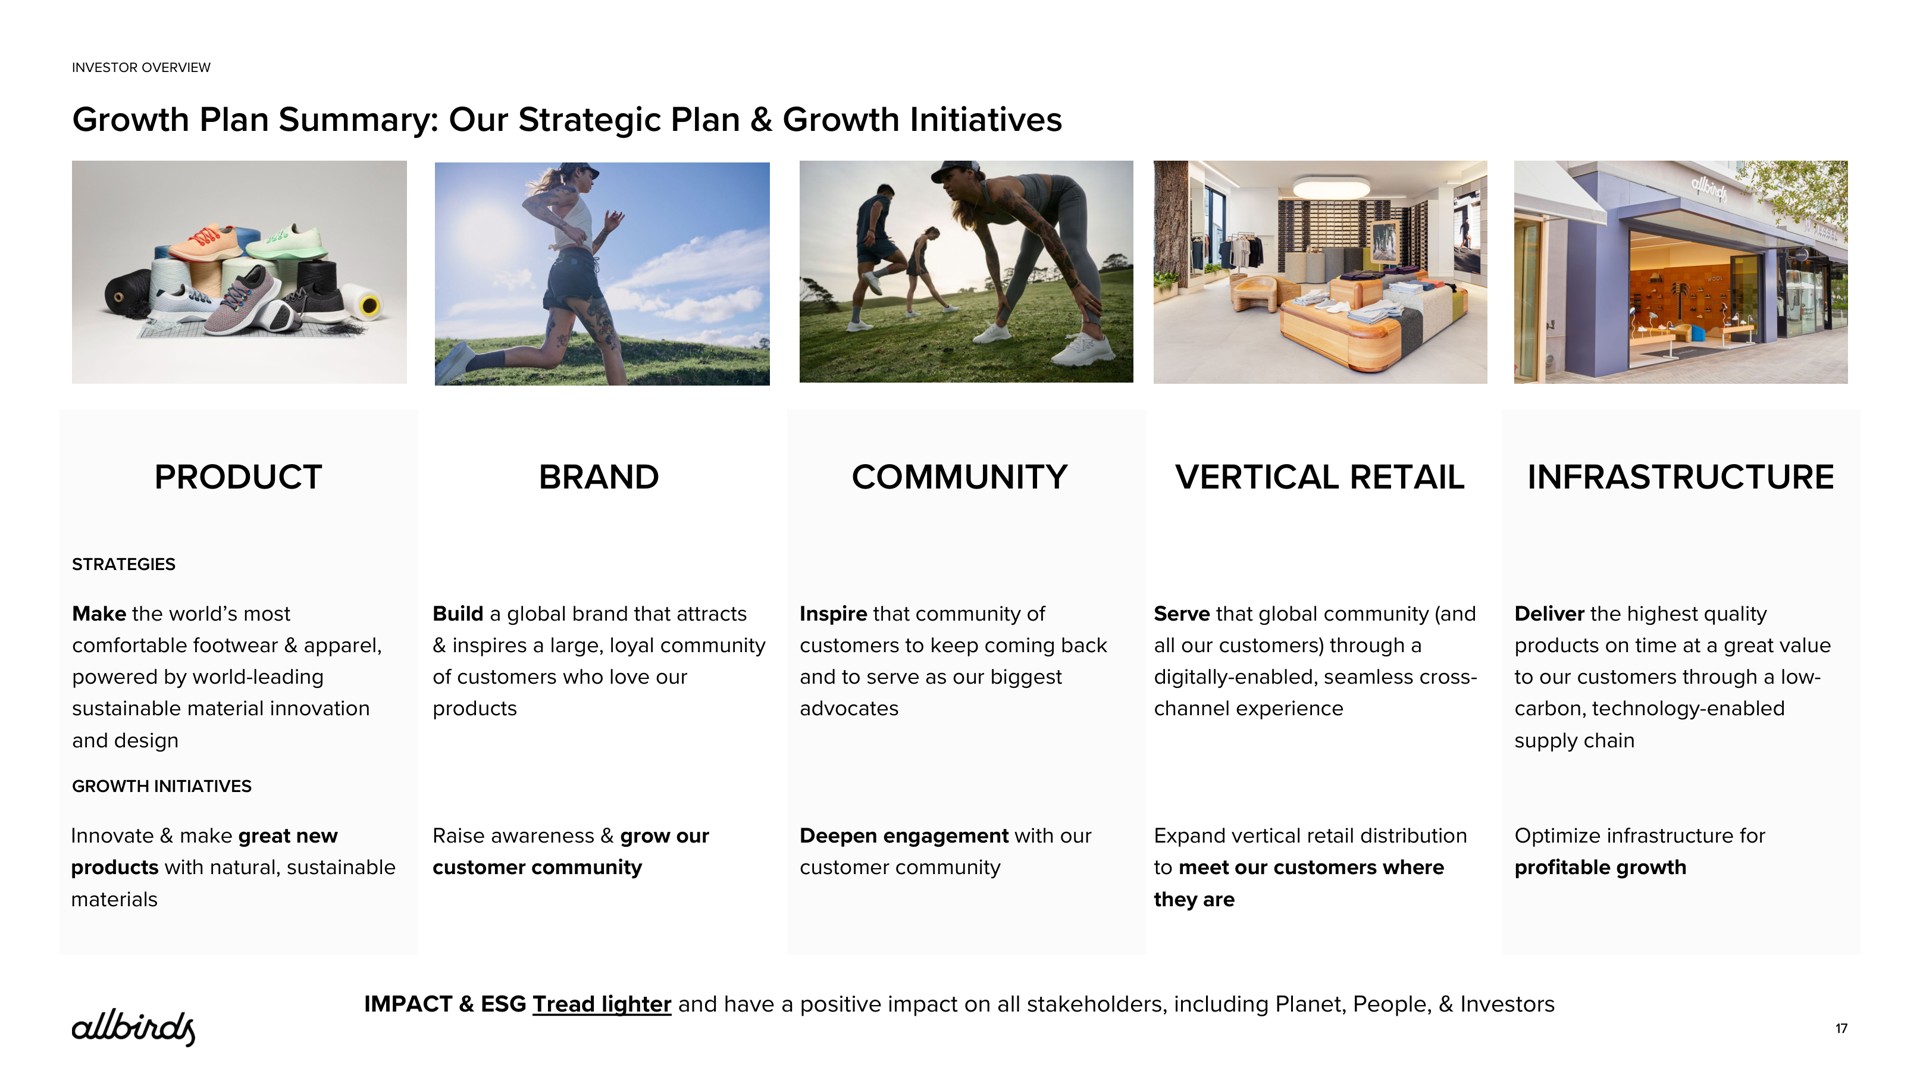 growth plan summary our strategic plan growth initiatives product brand community vertical retail infrastructure | Allbirds